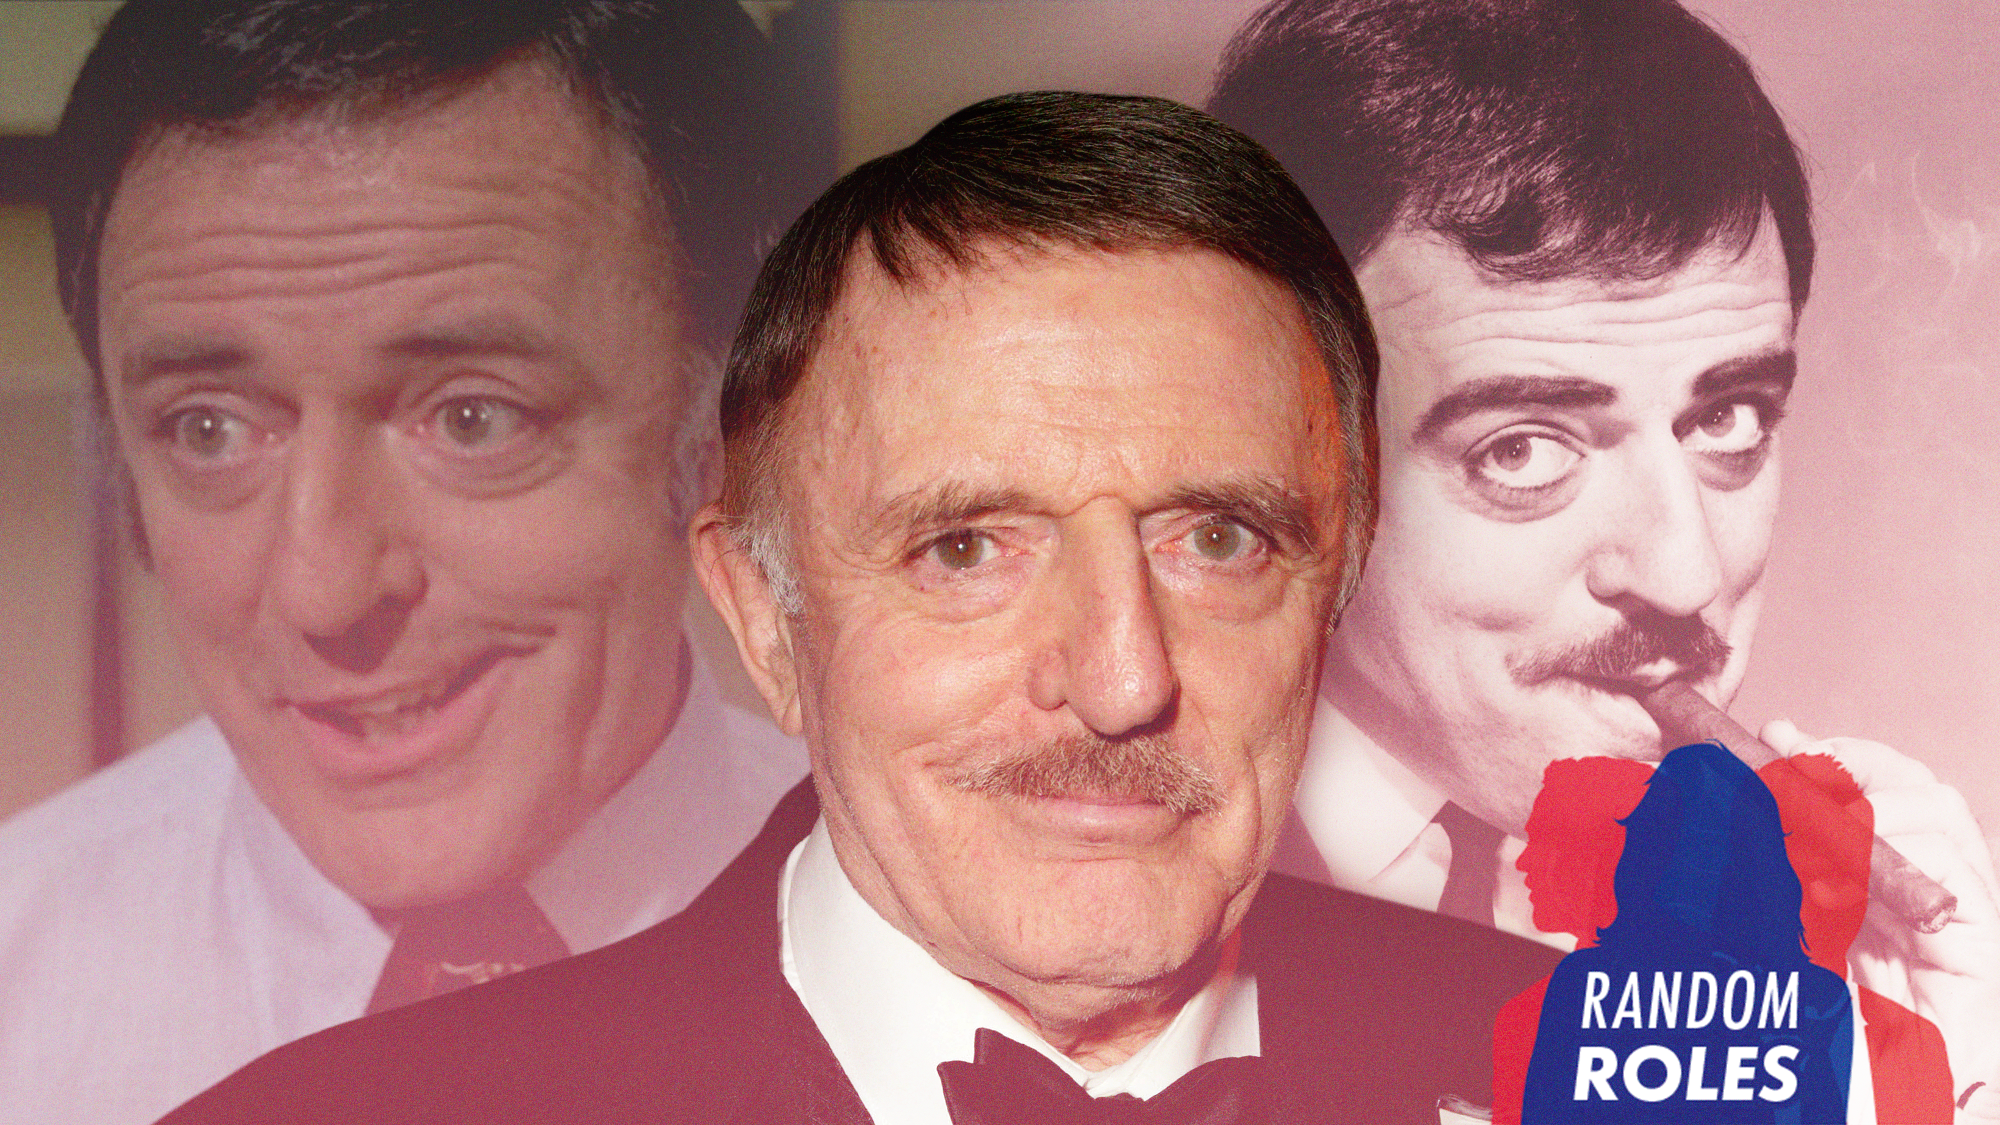 Addams Family star John Astin on playing Gomez, reading for Gandalf, meeting Fellini, and more